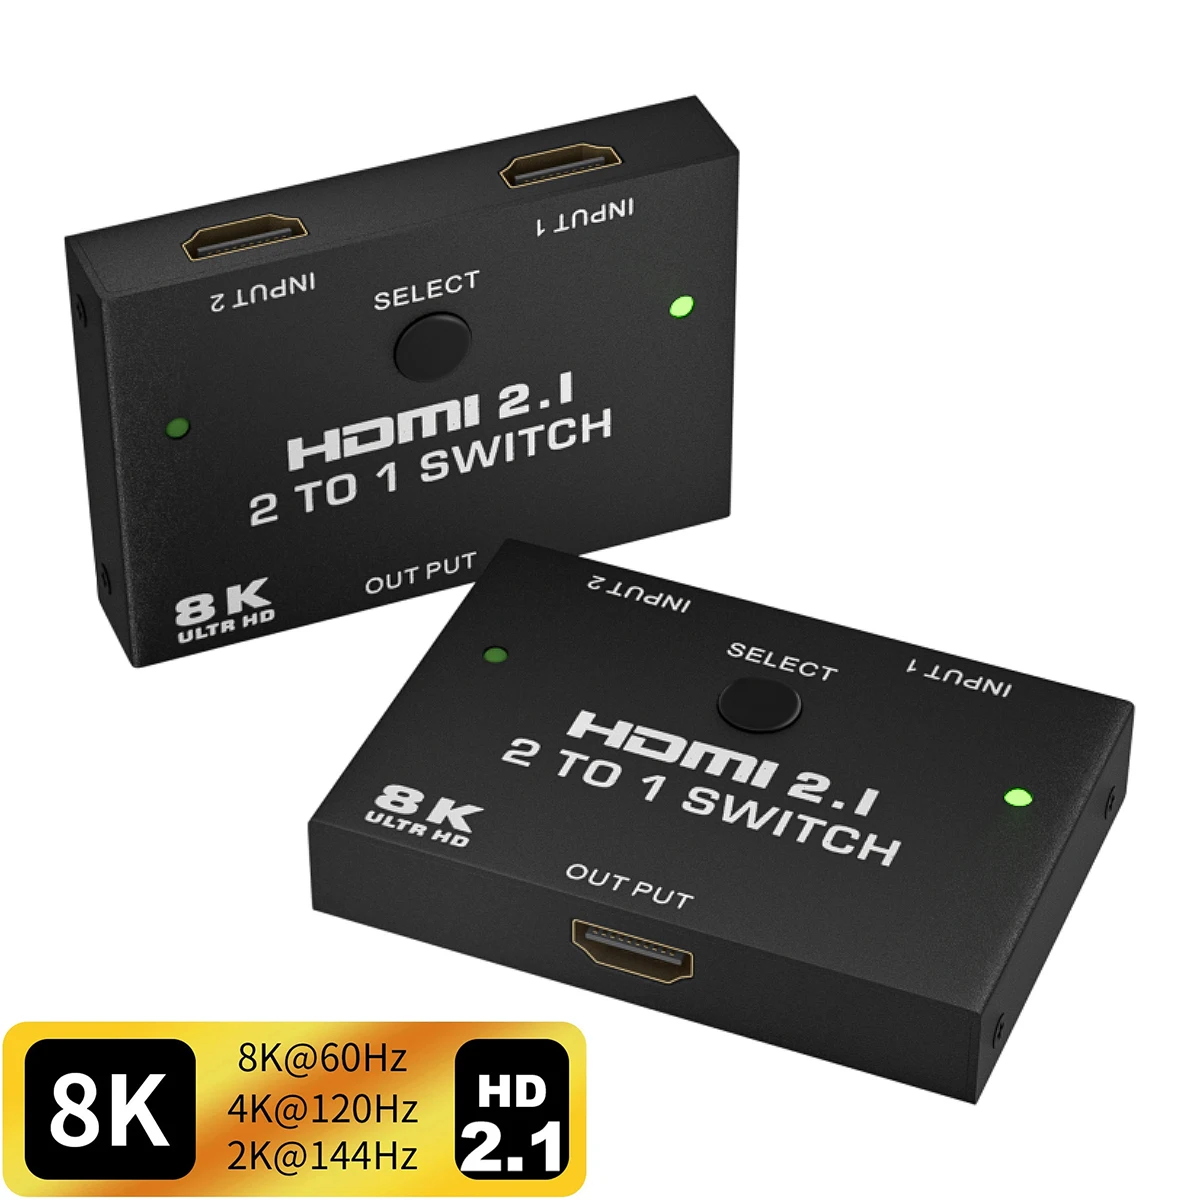 

8K HD Switch HDMI 2.1-compatible Bi-direction 8K@60Hz 4K@120Hz HDMI 2.1 Switcher 2X1 or 1X2 Splitter for PS5 PS4 pro apple TV